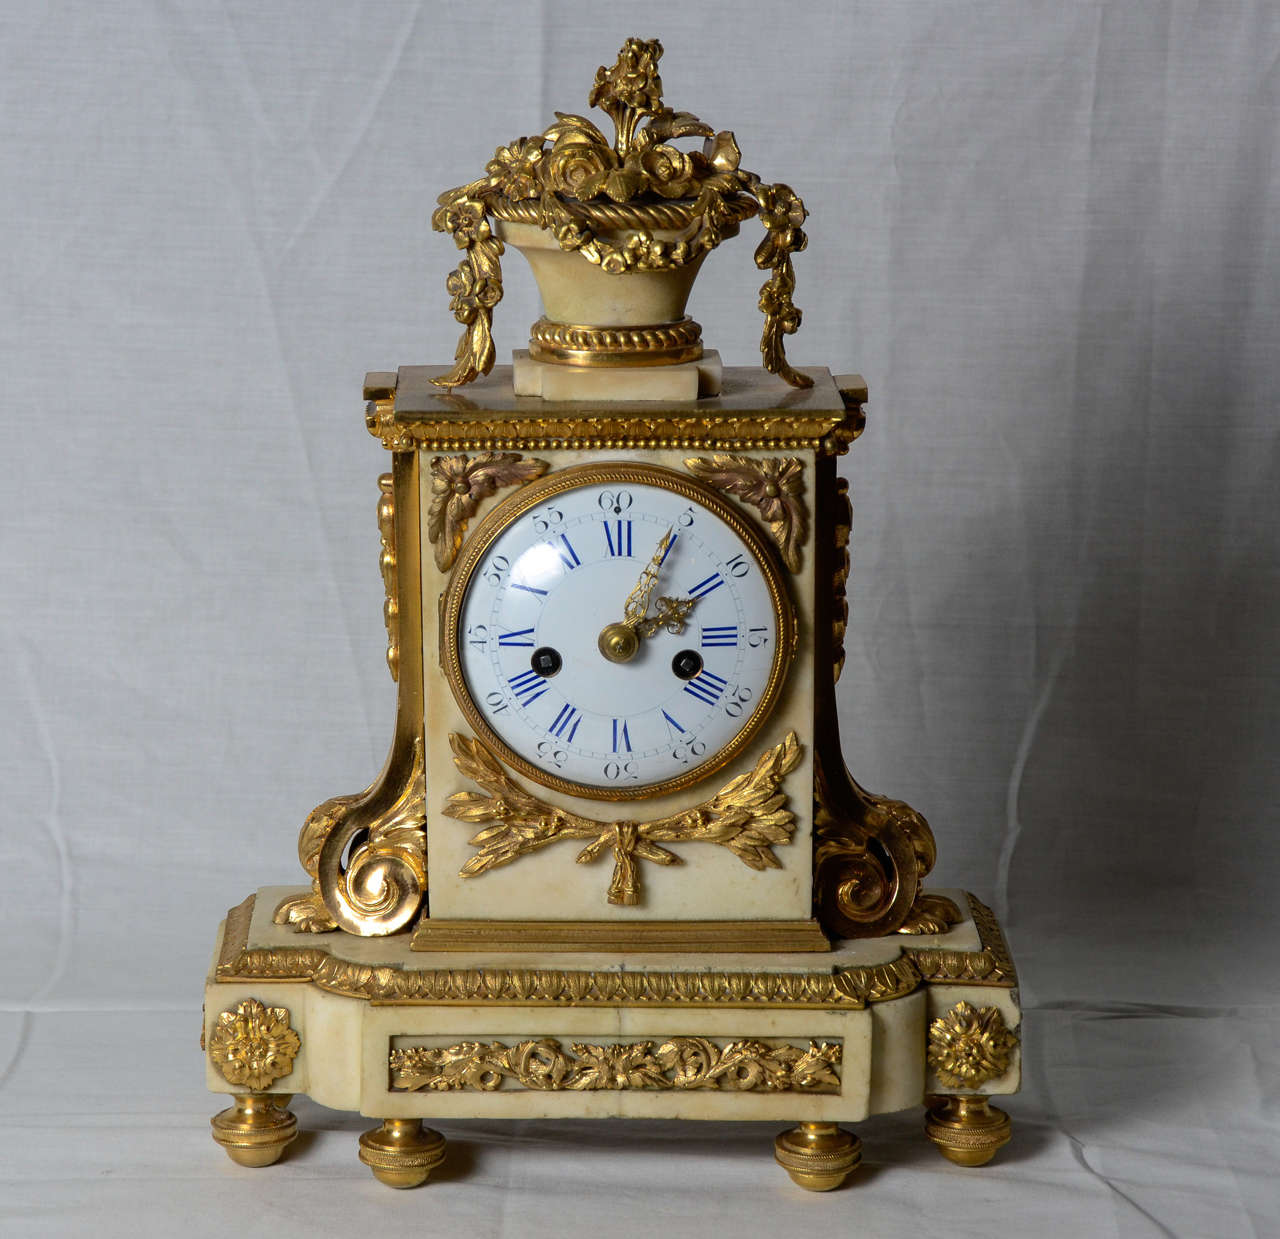 The white enamel dial with Roman hours , surmounted by a basket of flowers in gilt bronze on white marble base raised on six legs is adorned with jewels and garlands.